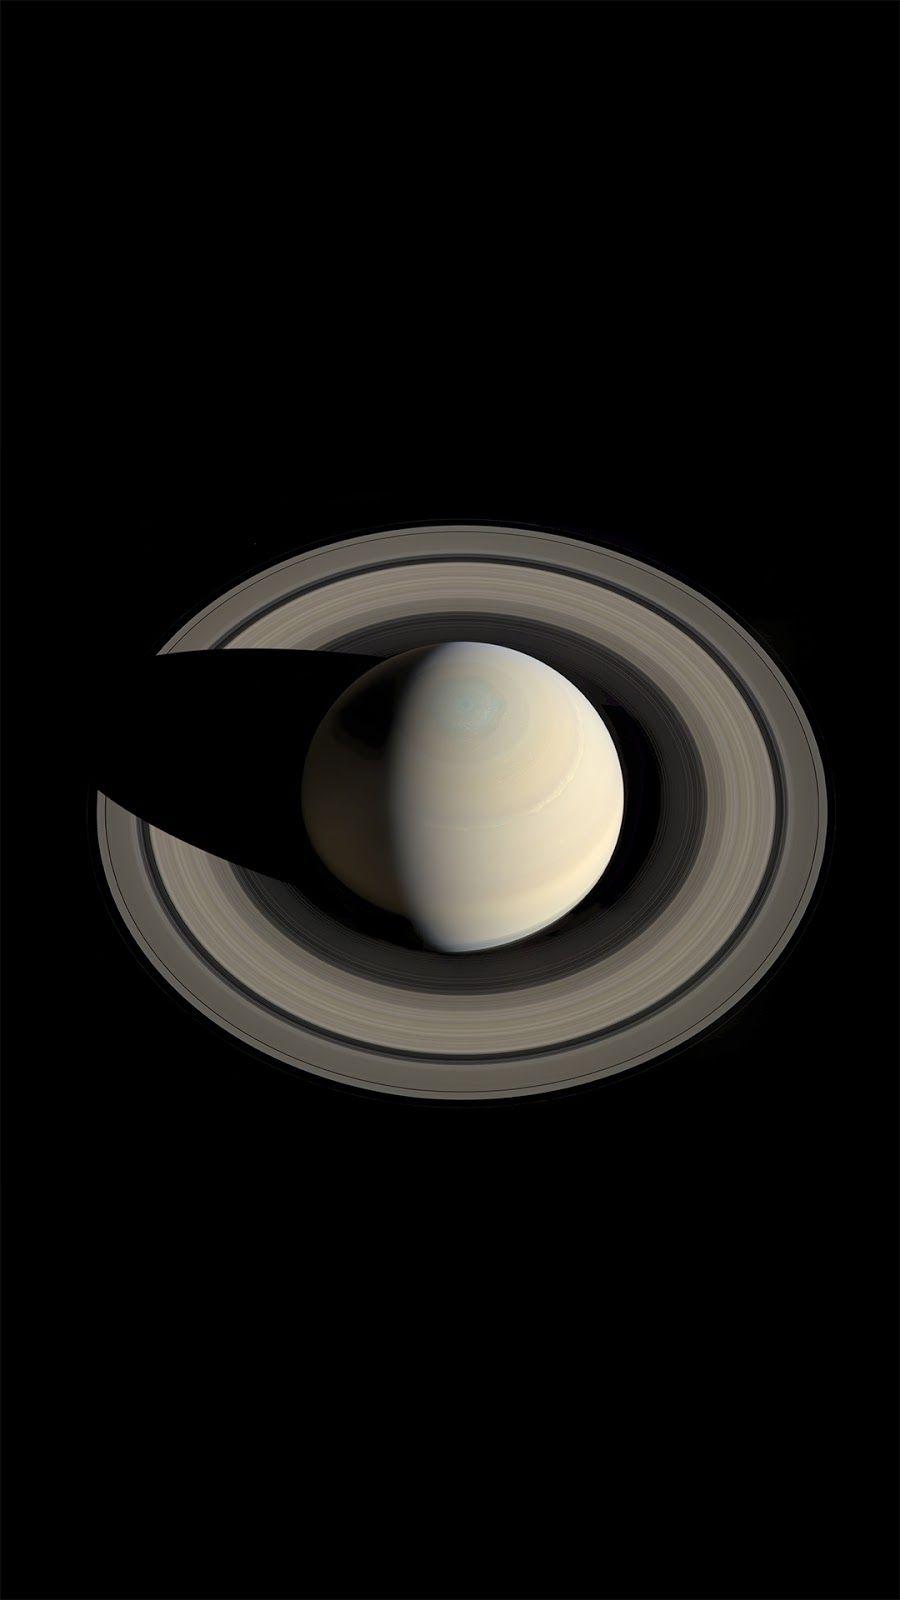 Saturn Aesthetic Wallpapers Top Free Saturn Aesthetic Backgrounds Wallpaperaccess 0162